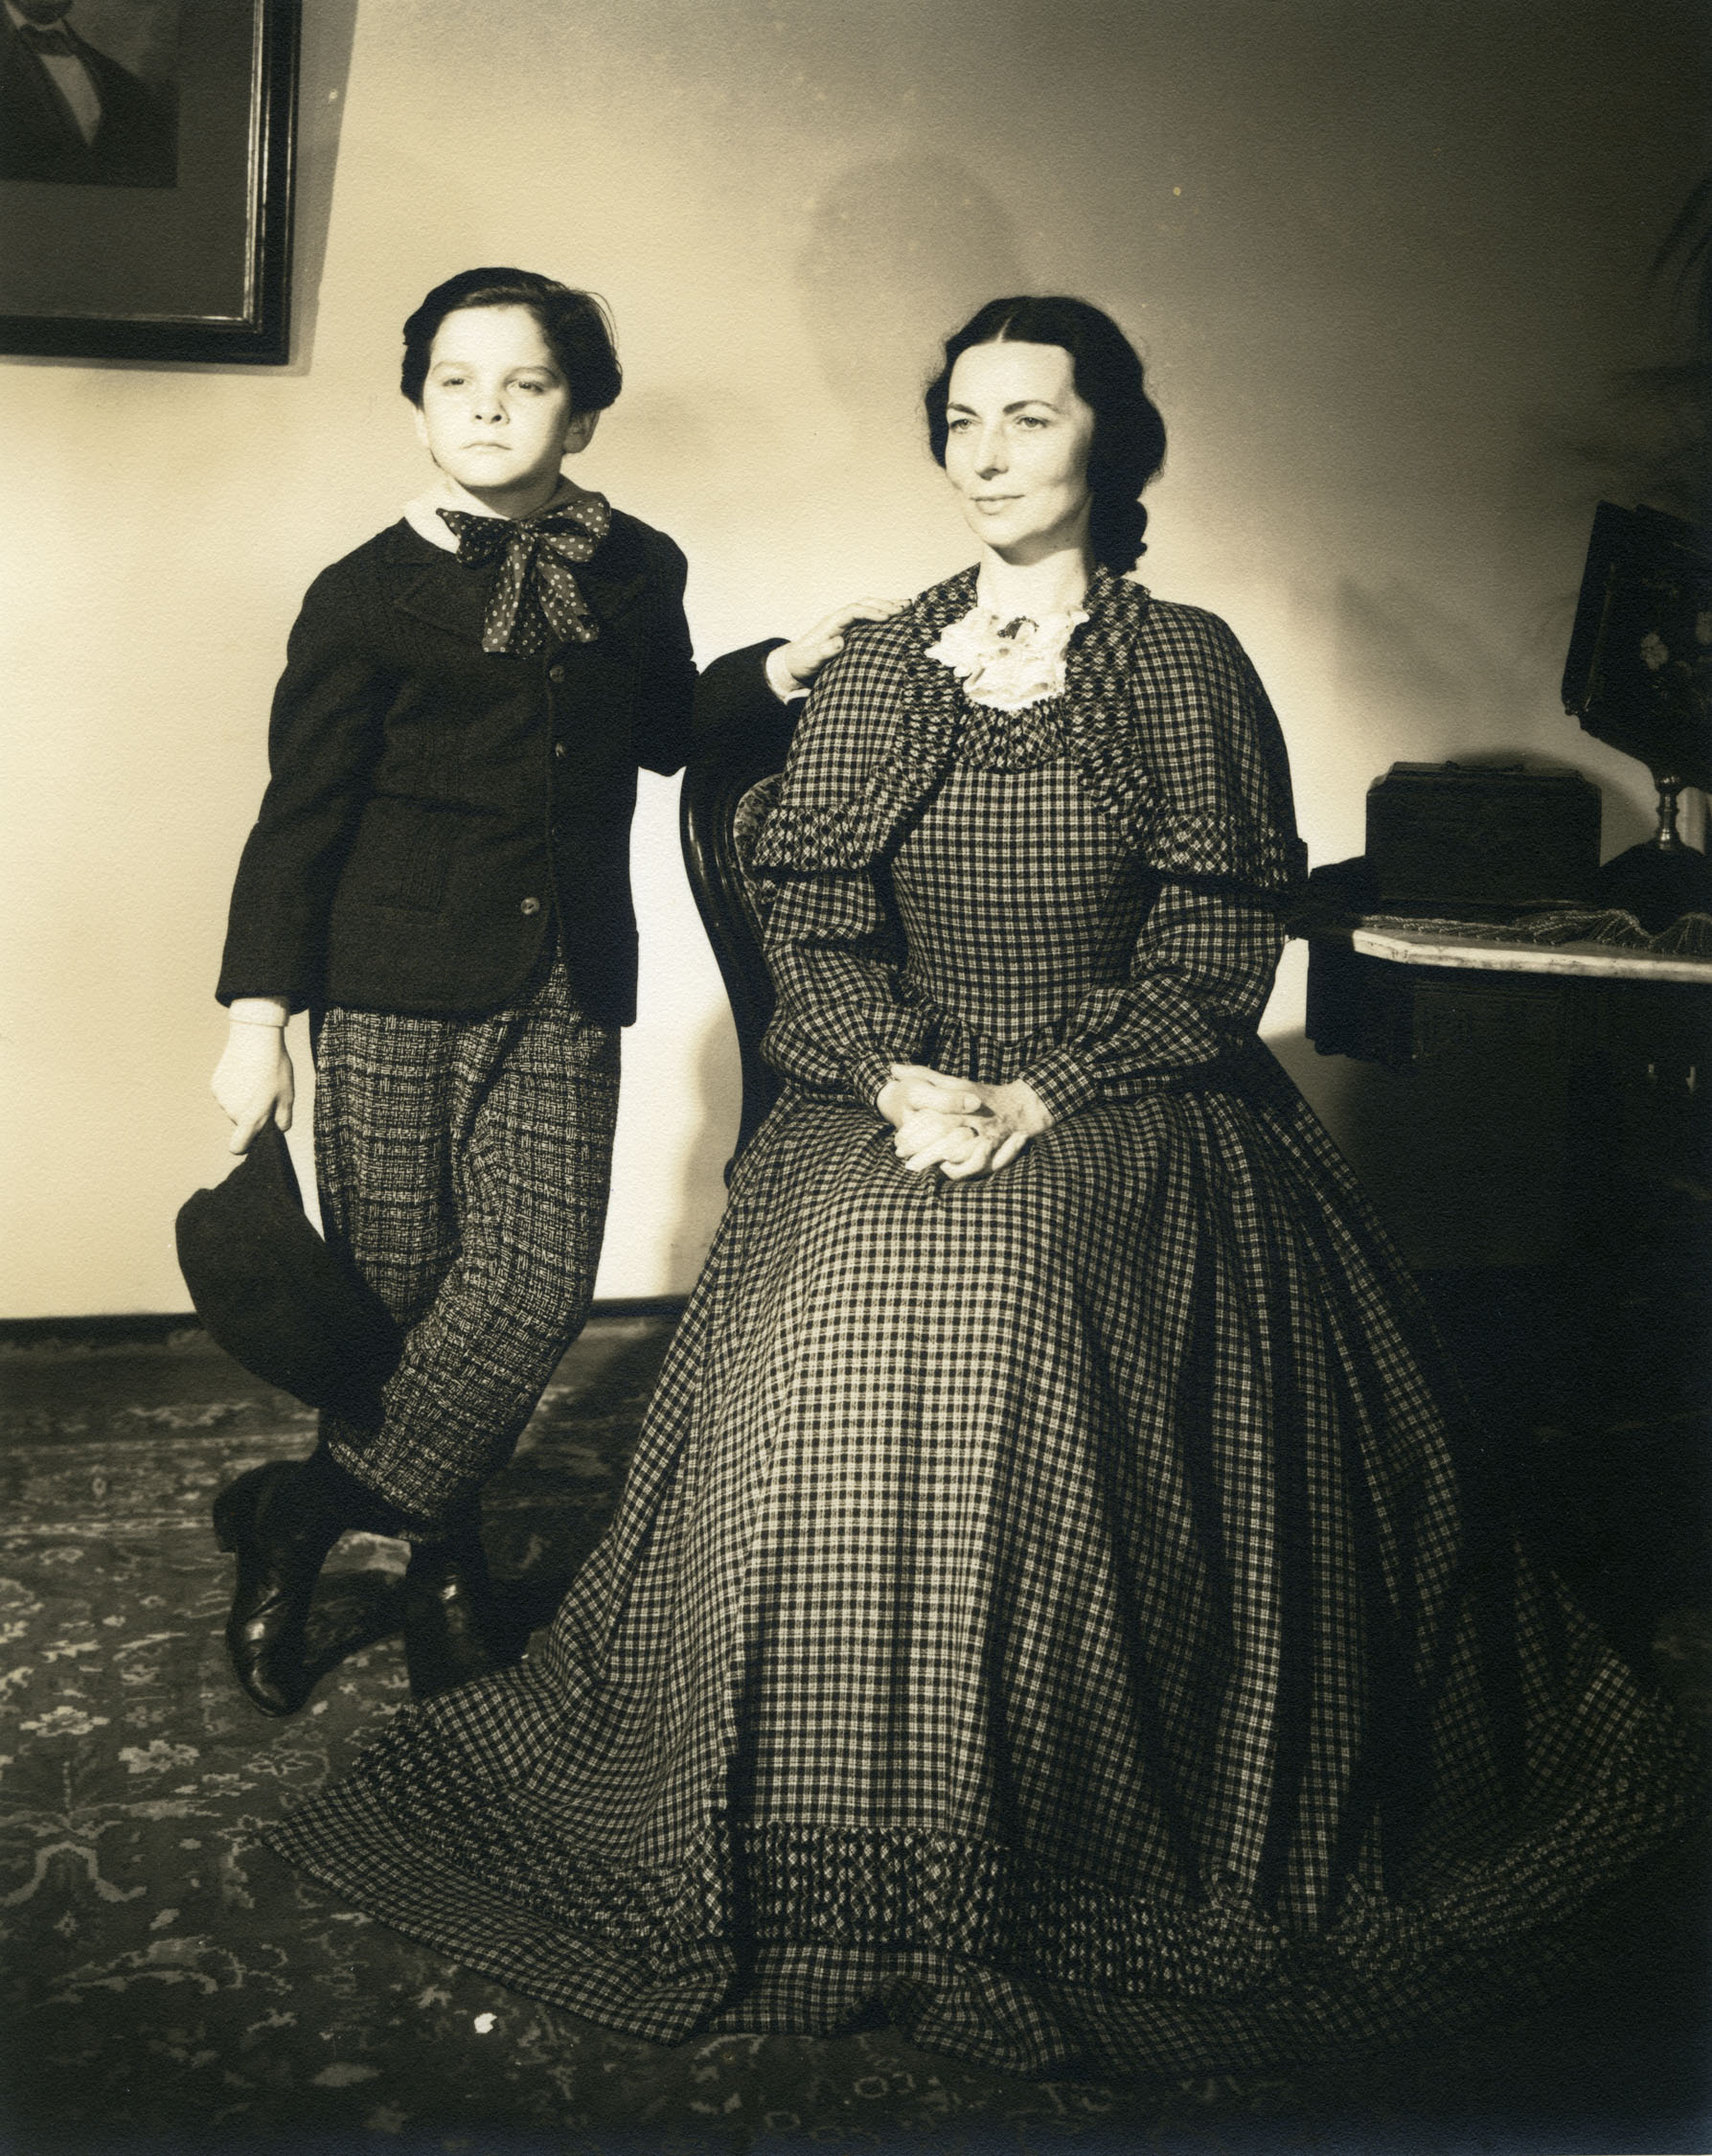 Buddy Swan (young Kane, left) and Agnes Moorehead (Mary Kane, right) in a portrait that may originally have been created for set decoration.